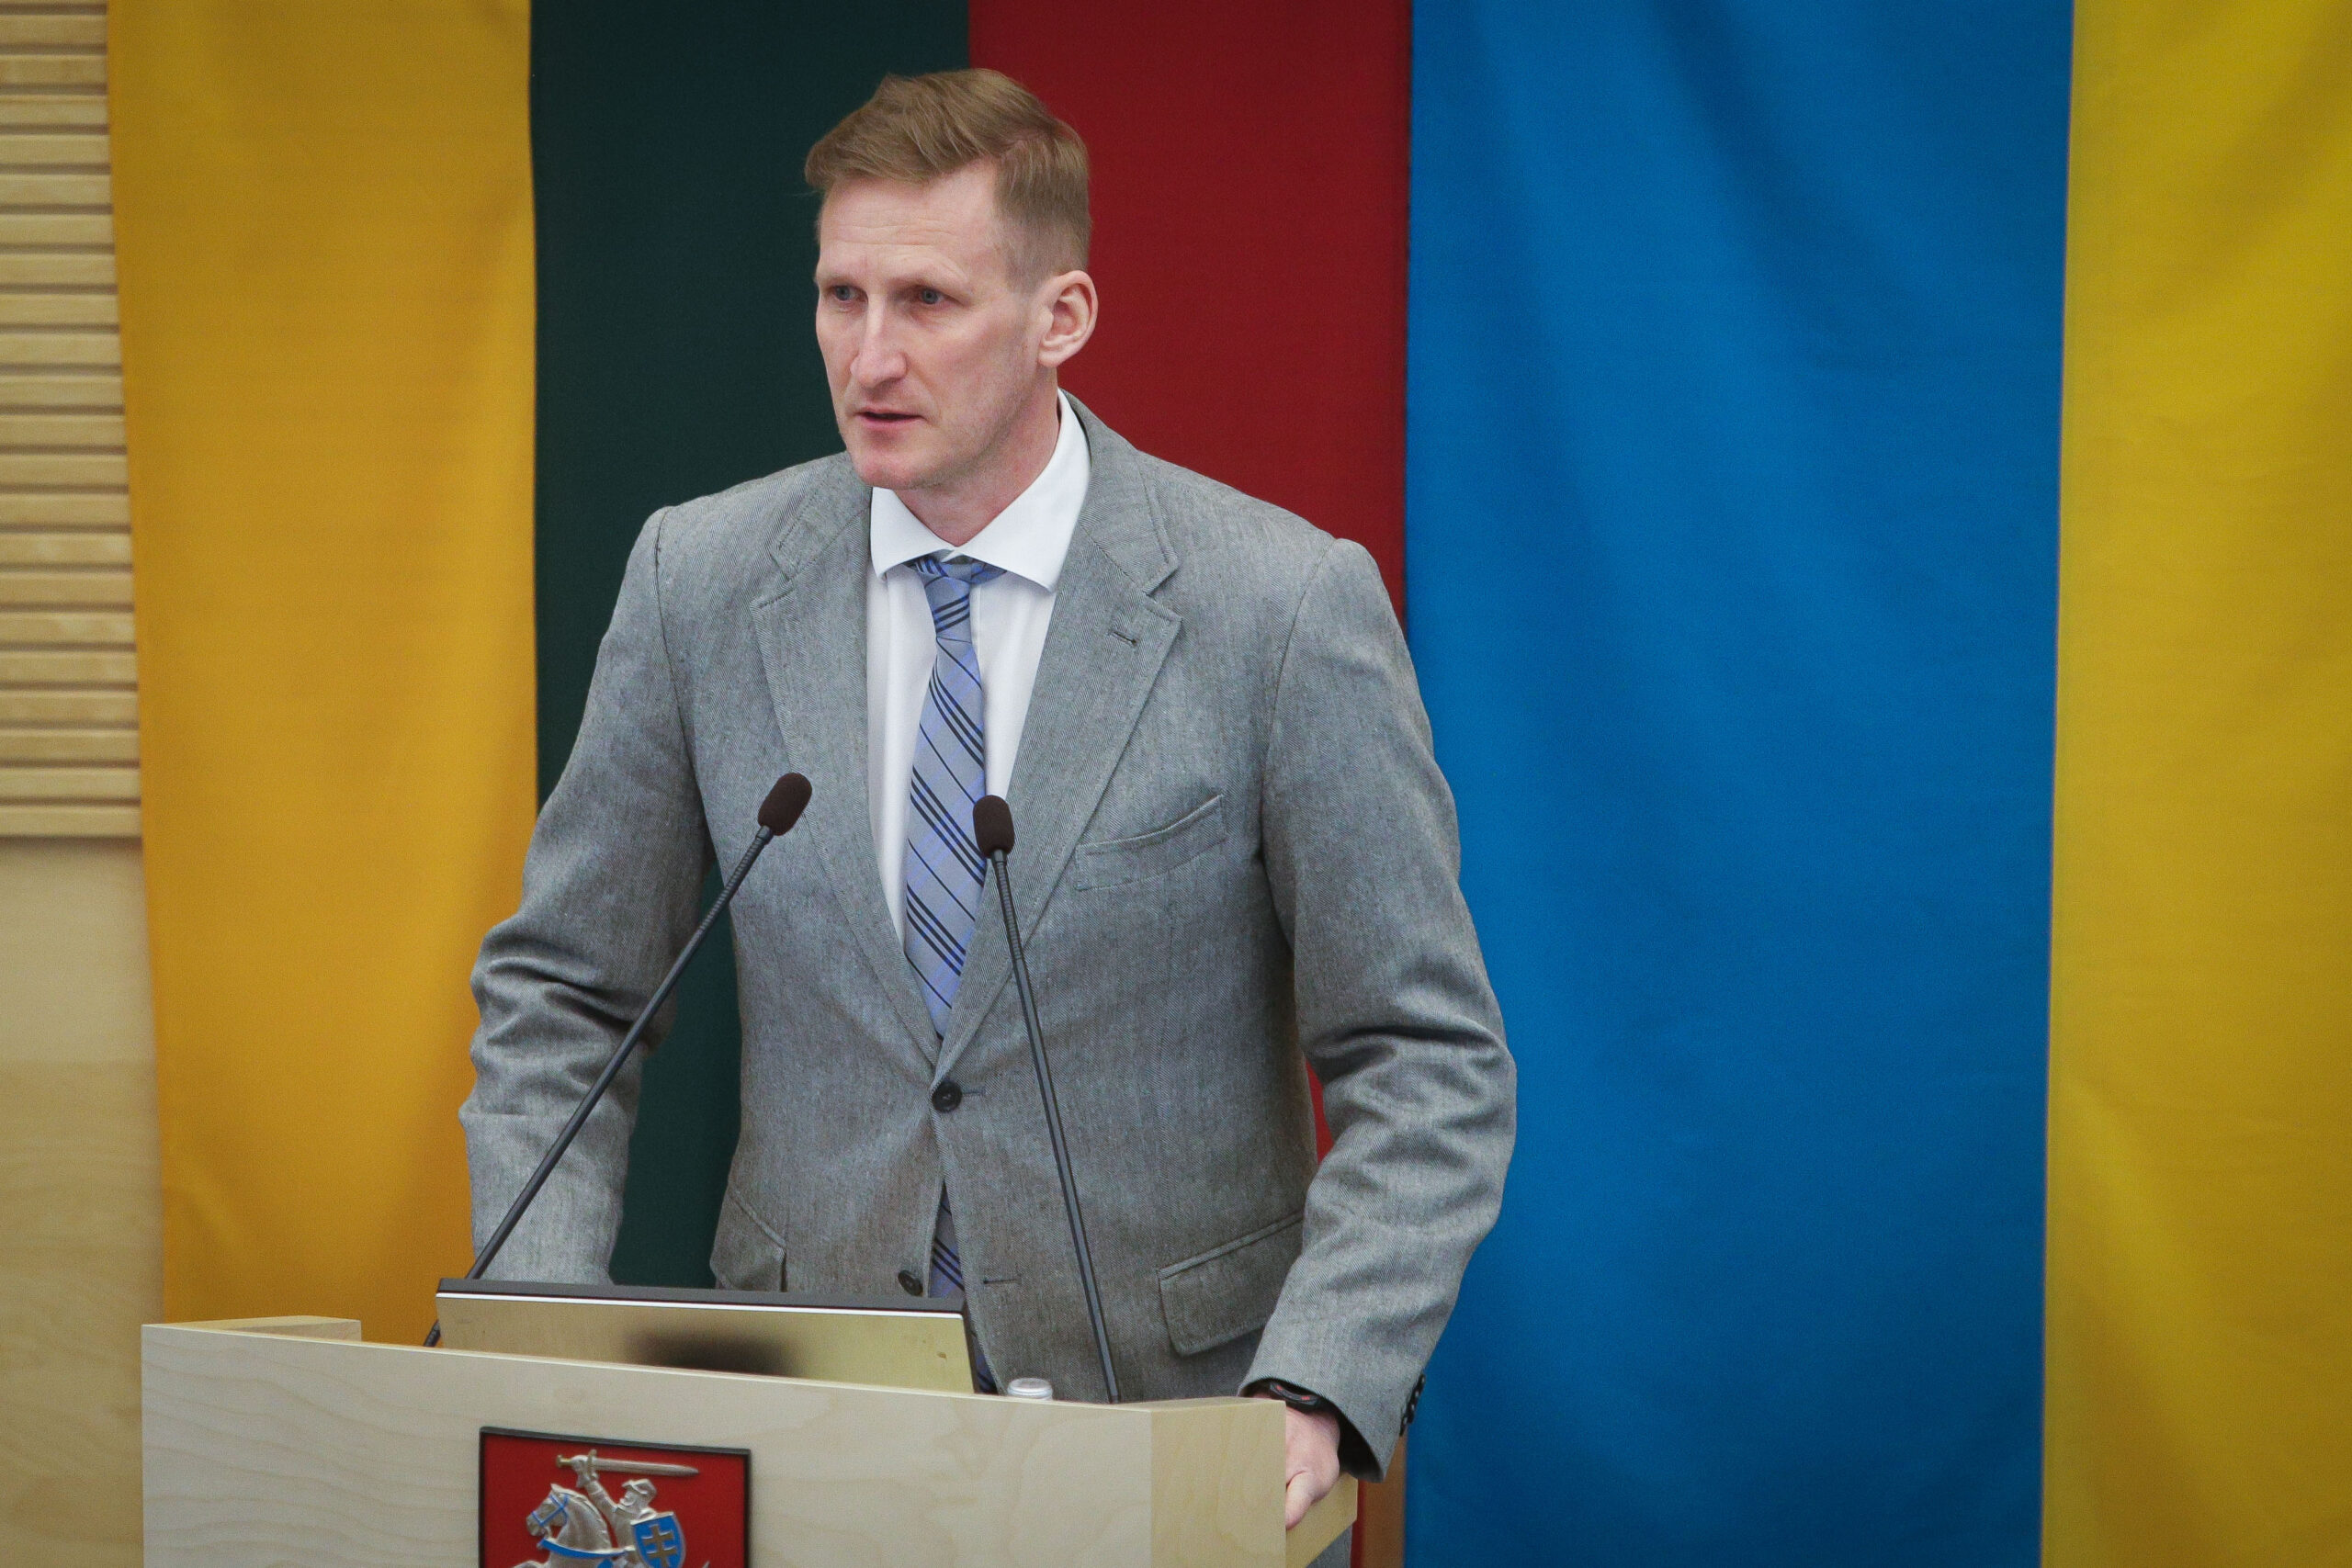 Linas Jonauskas, in front of two flags - one Lithuanian, one Ukrainian - standing before a podium